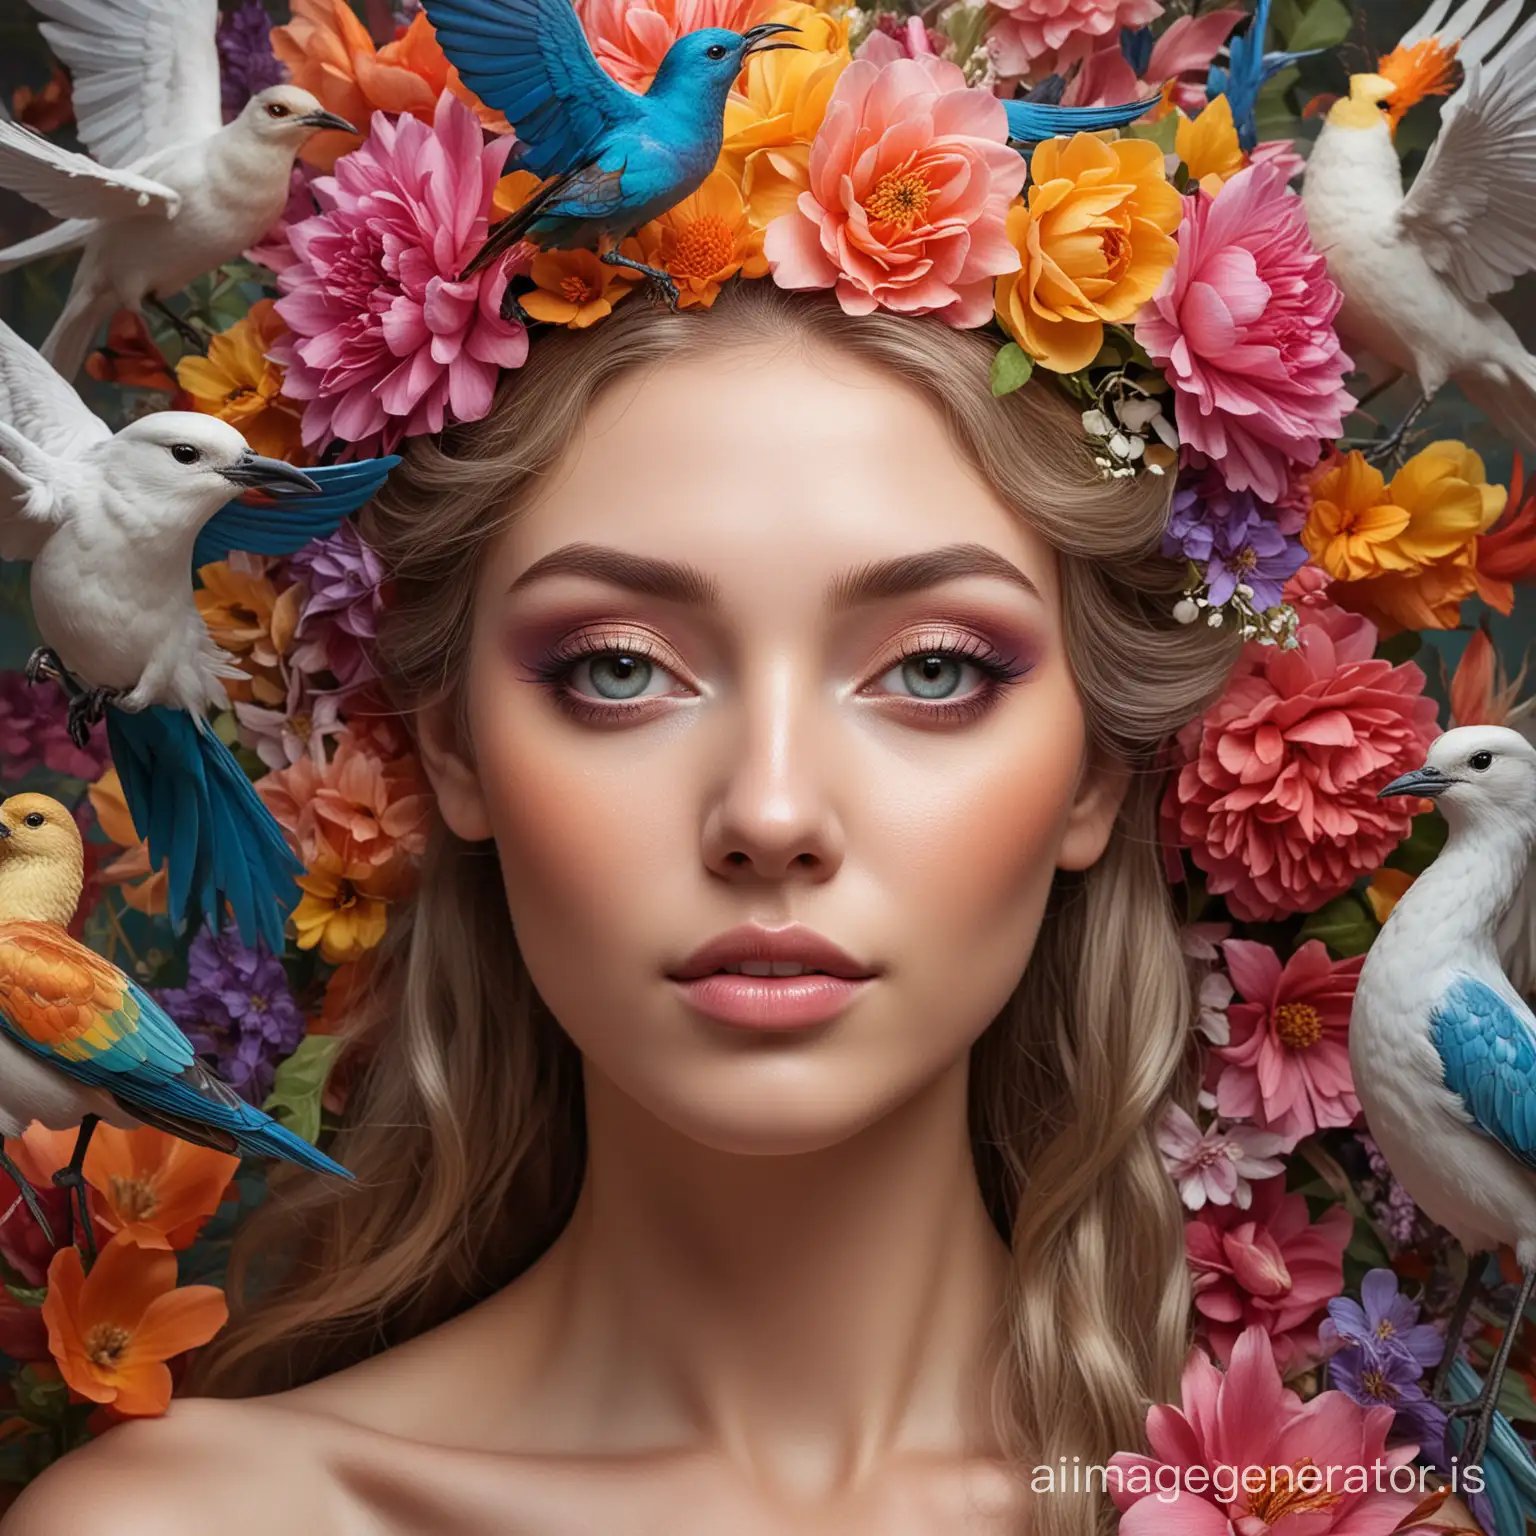 Radiant-Flower-Nymph-Surrounded-by-Colorful-Birds-Ethereal-Goddess-Portrait